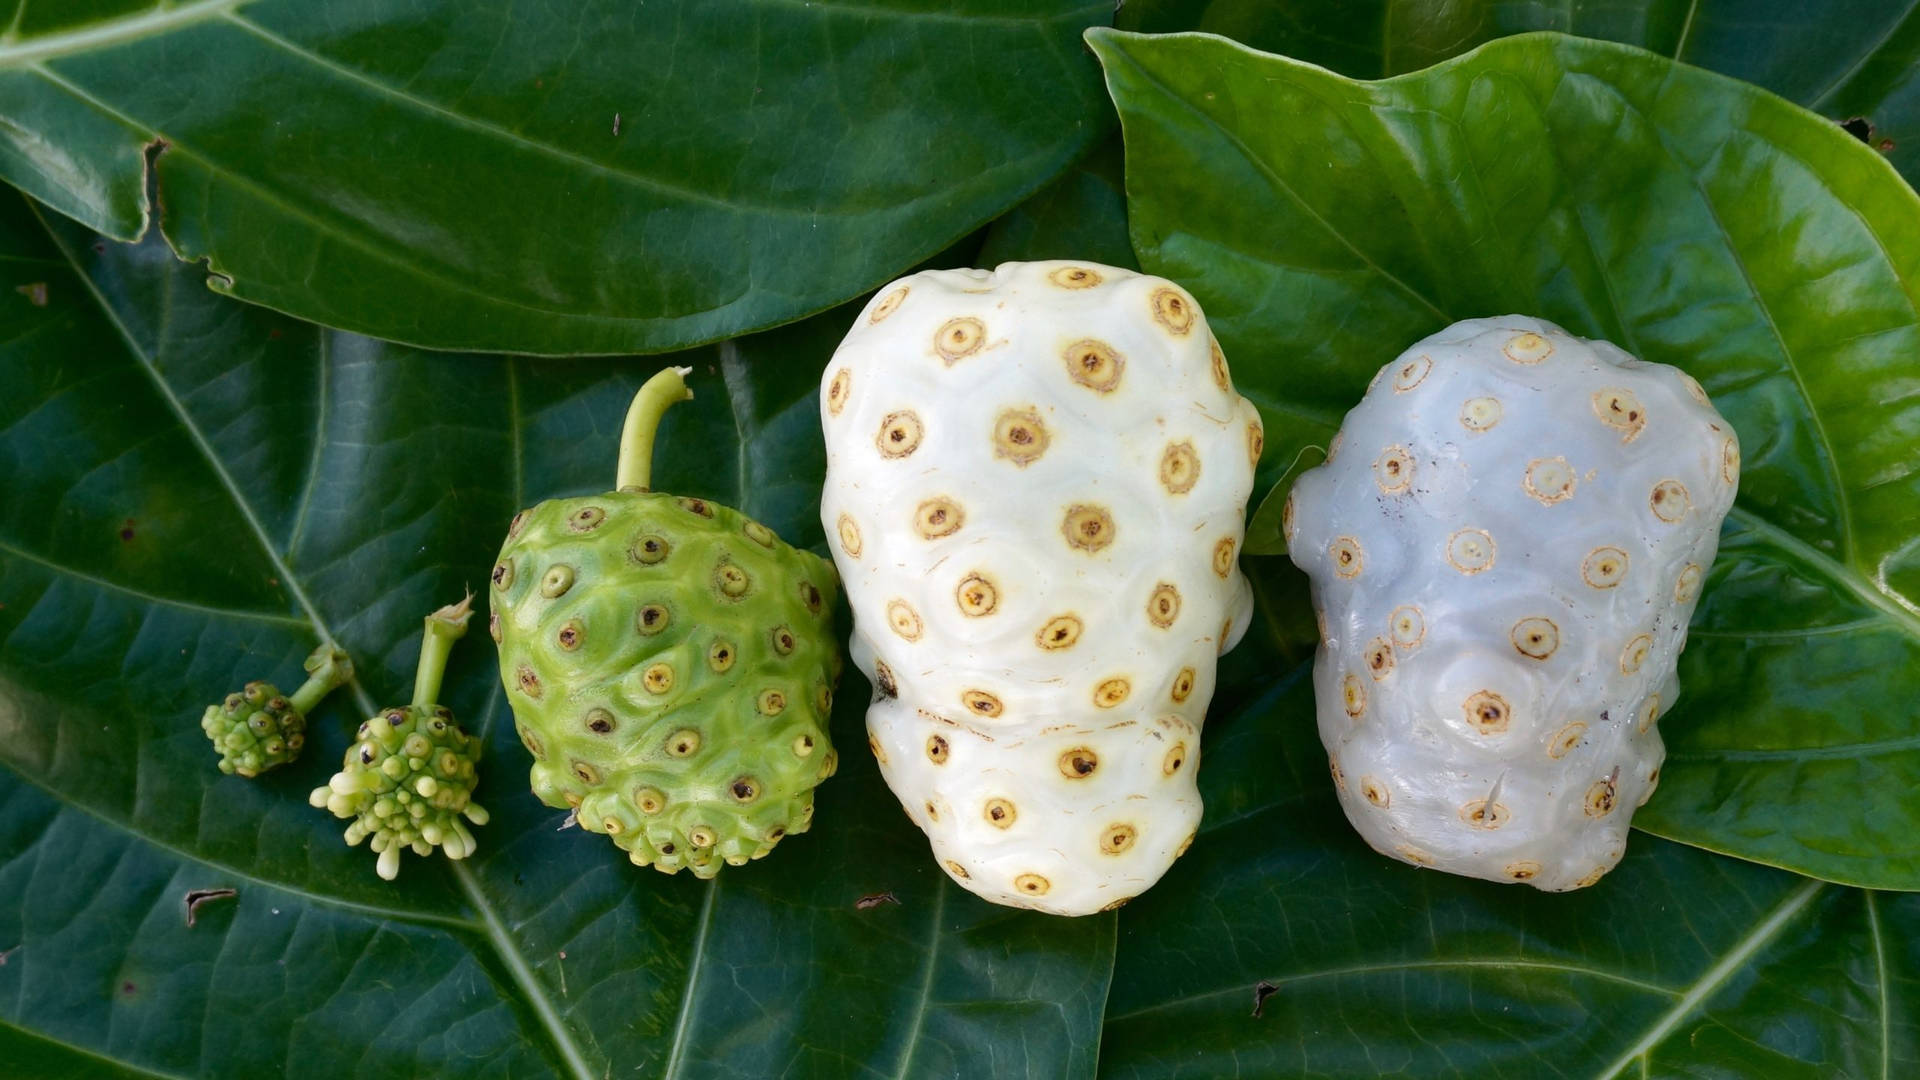 Nonifruckterskeden (for A Computer Or Mobile Wallpaper Showcasing Different Stages Of Noni Fruit Growth) Wallpaper